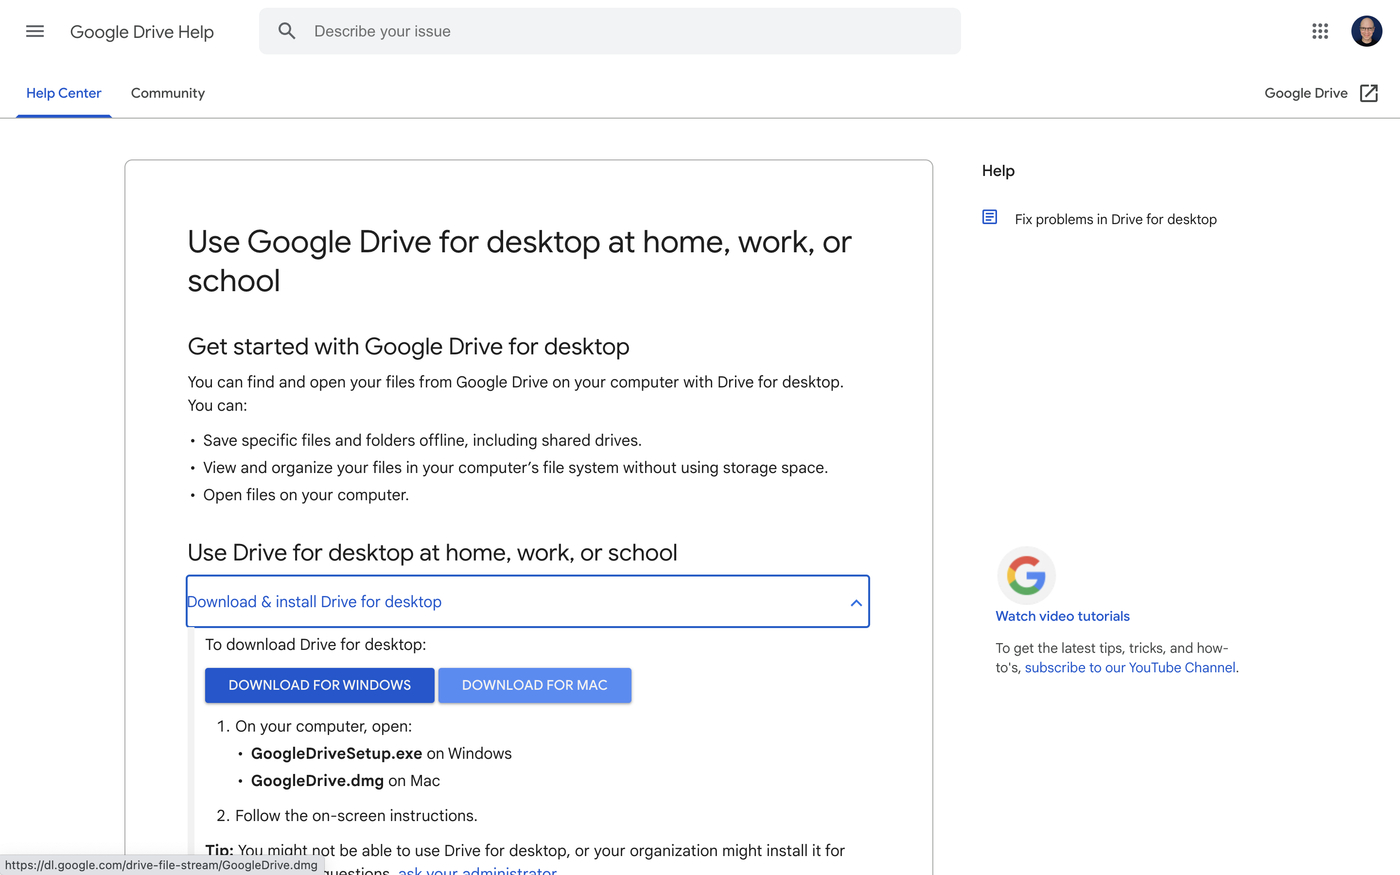 Google Drive Help page with instructions for using Google Drive for desktop